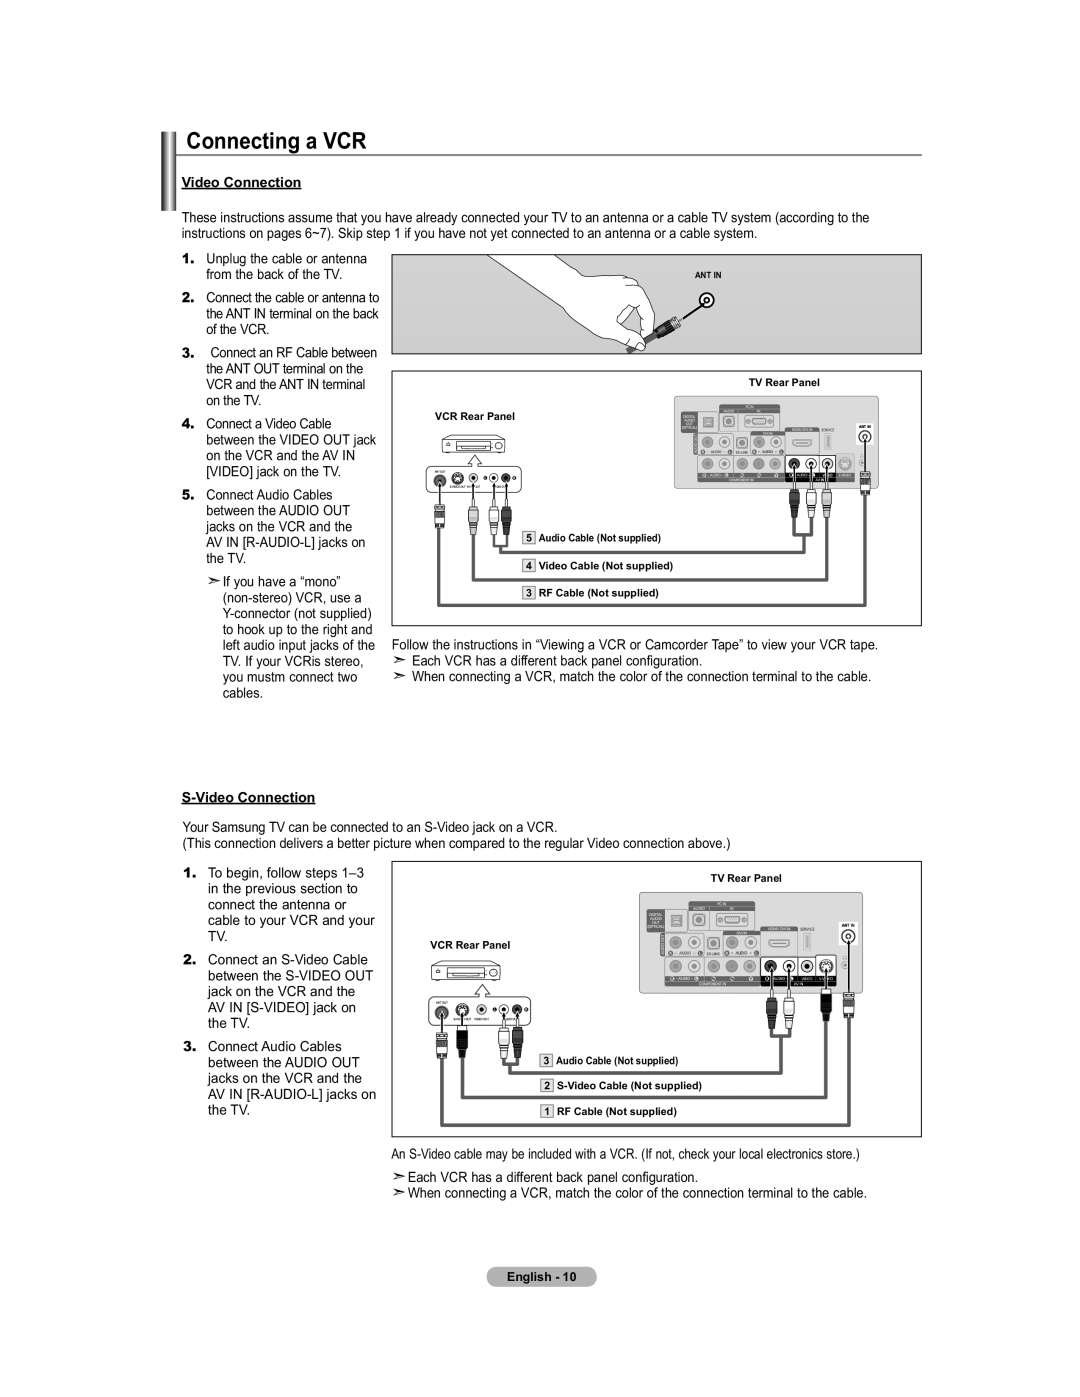 Samsung 451 user manual Connecting a VCR, S-Video Connection 